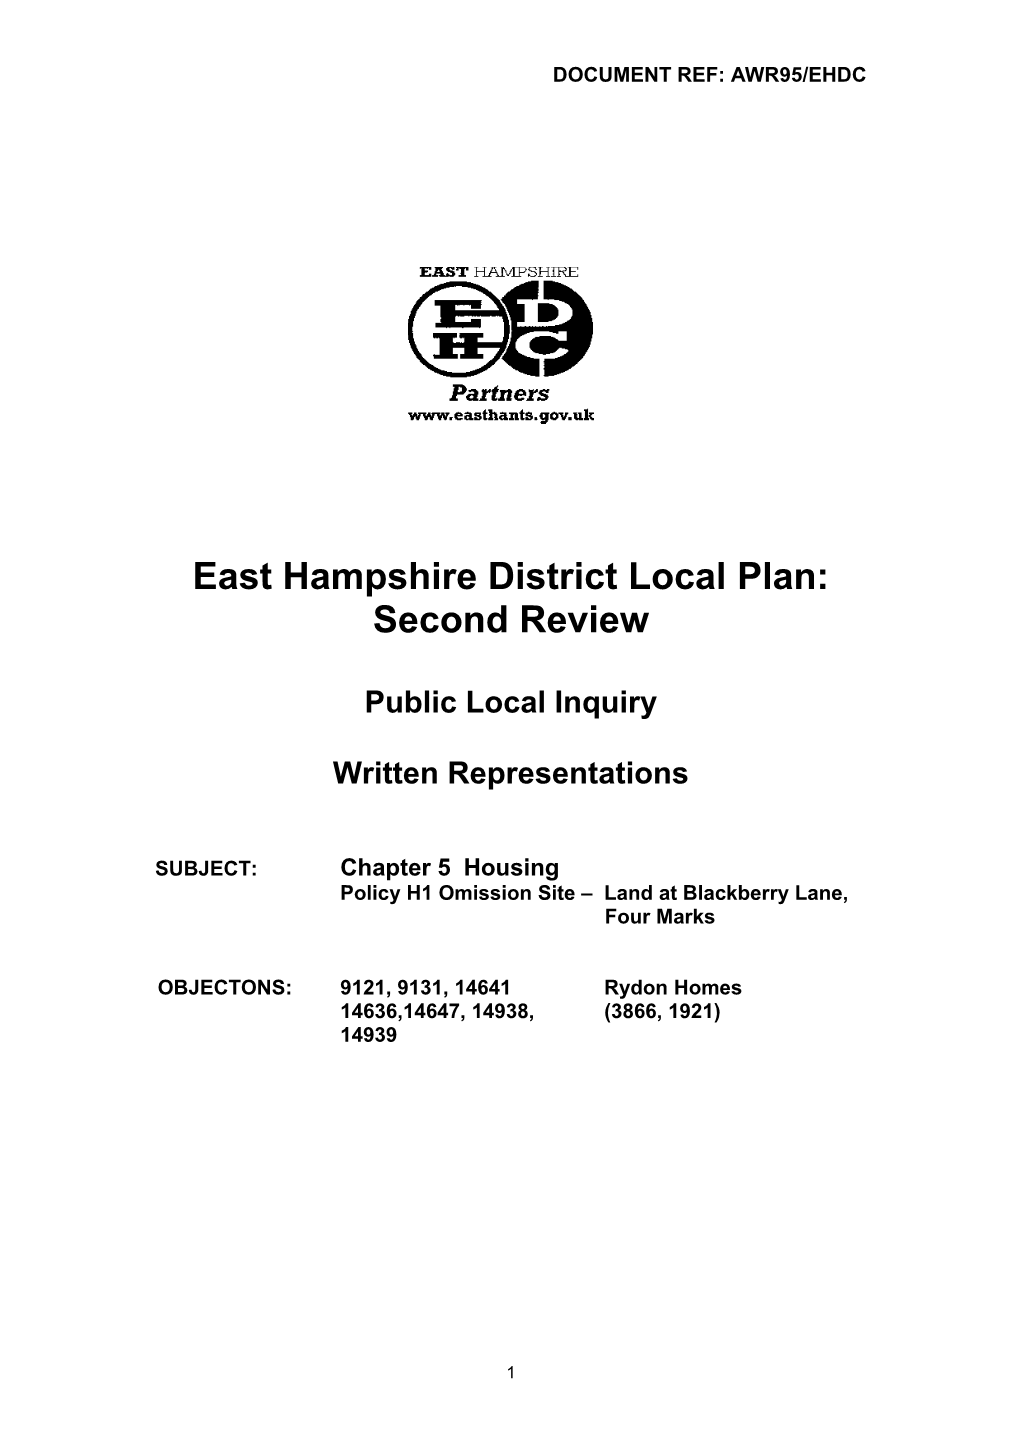 East Hampshire District Local Plan: Second Review